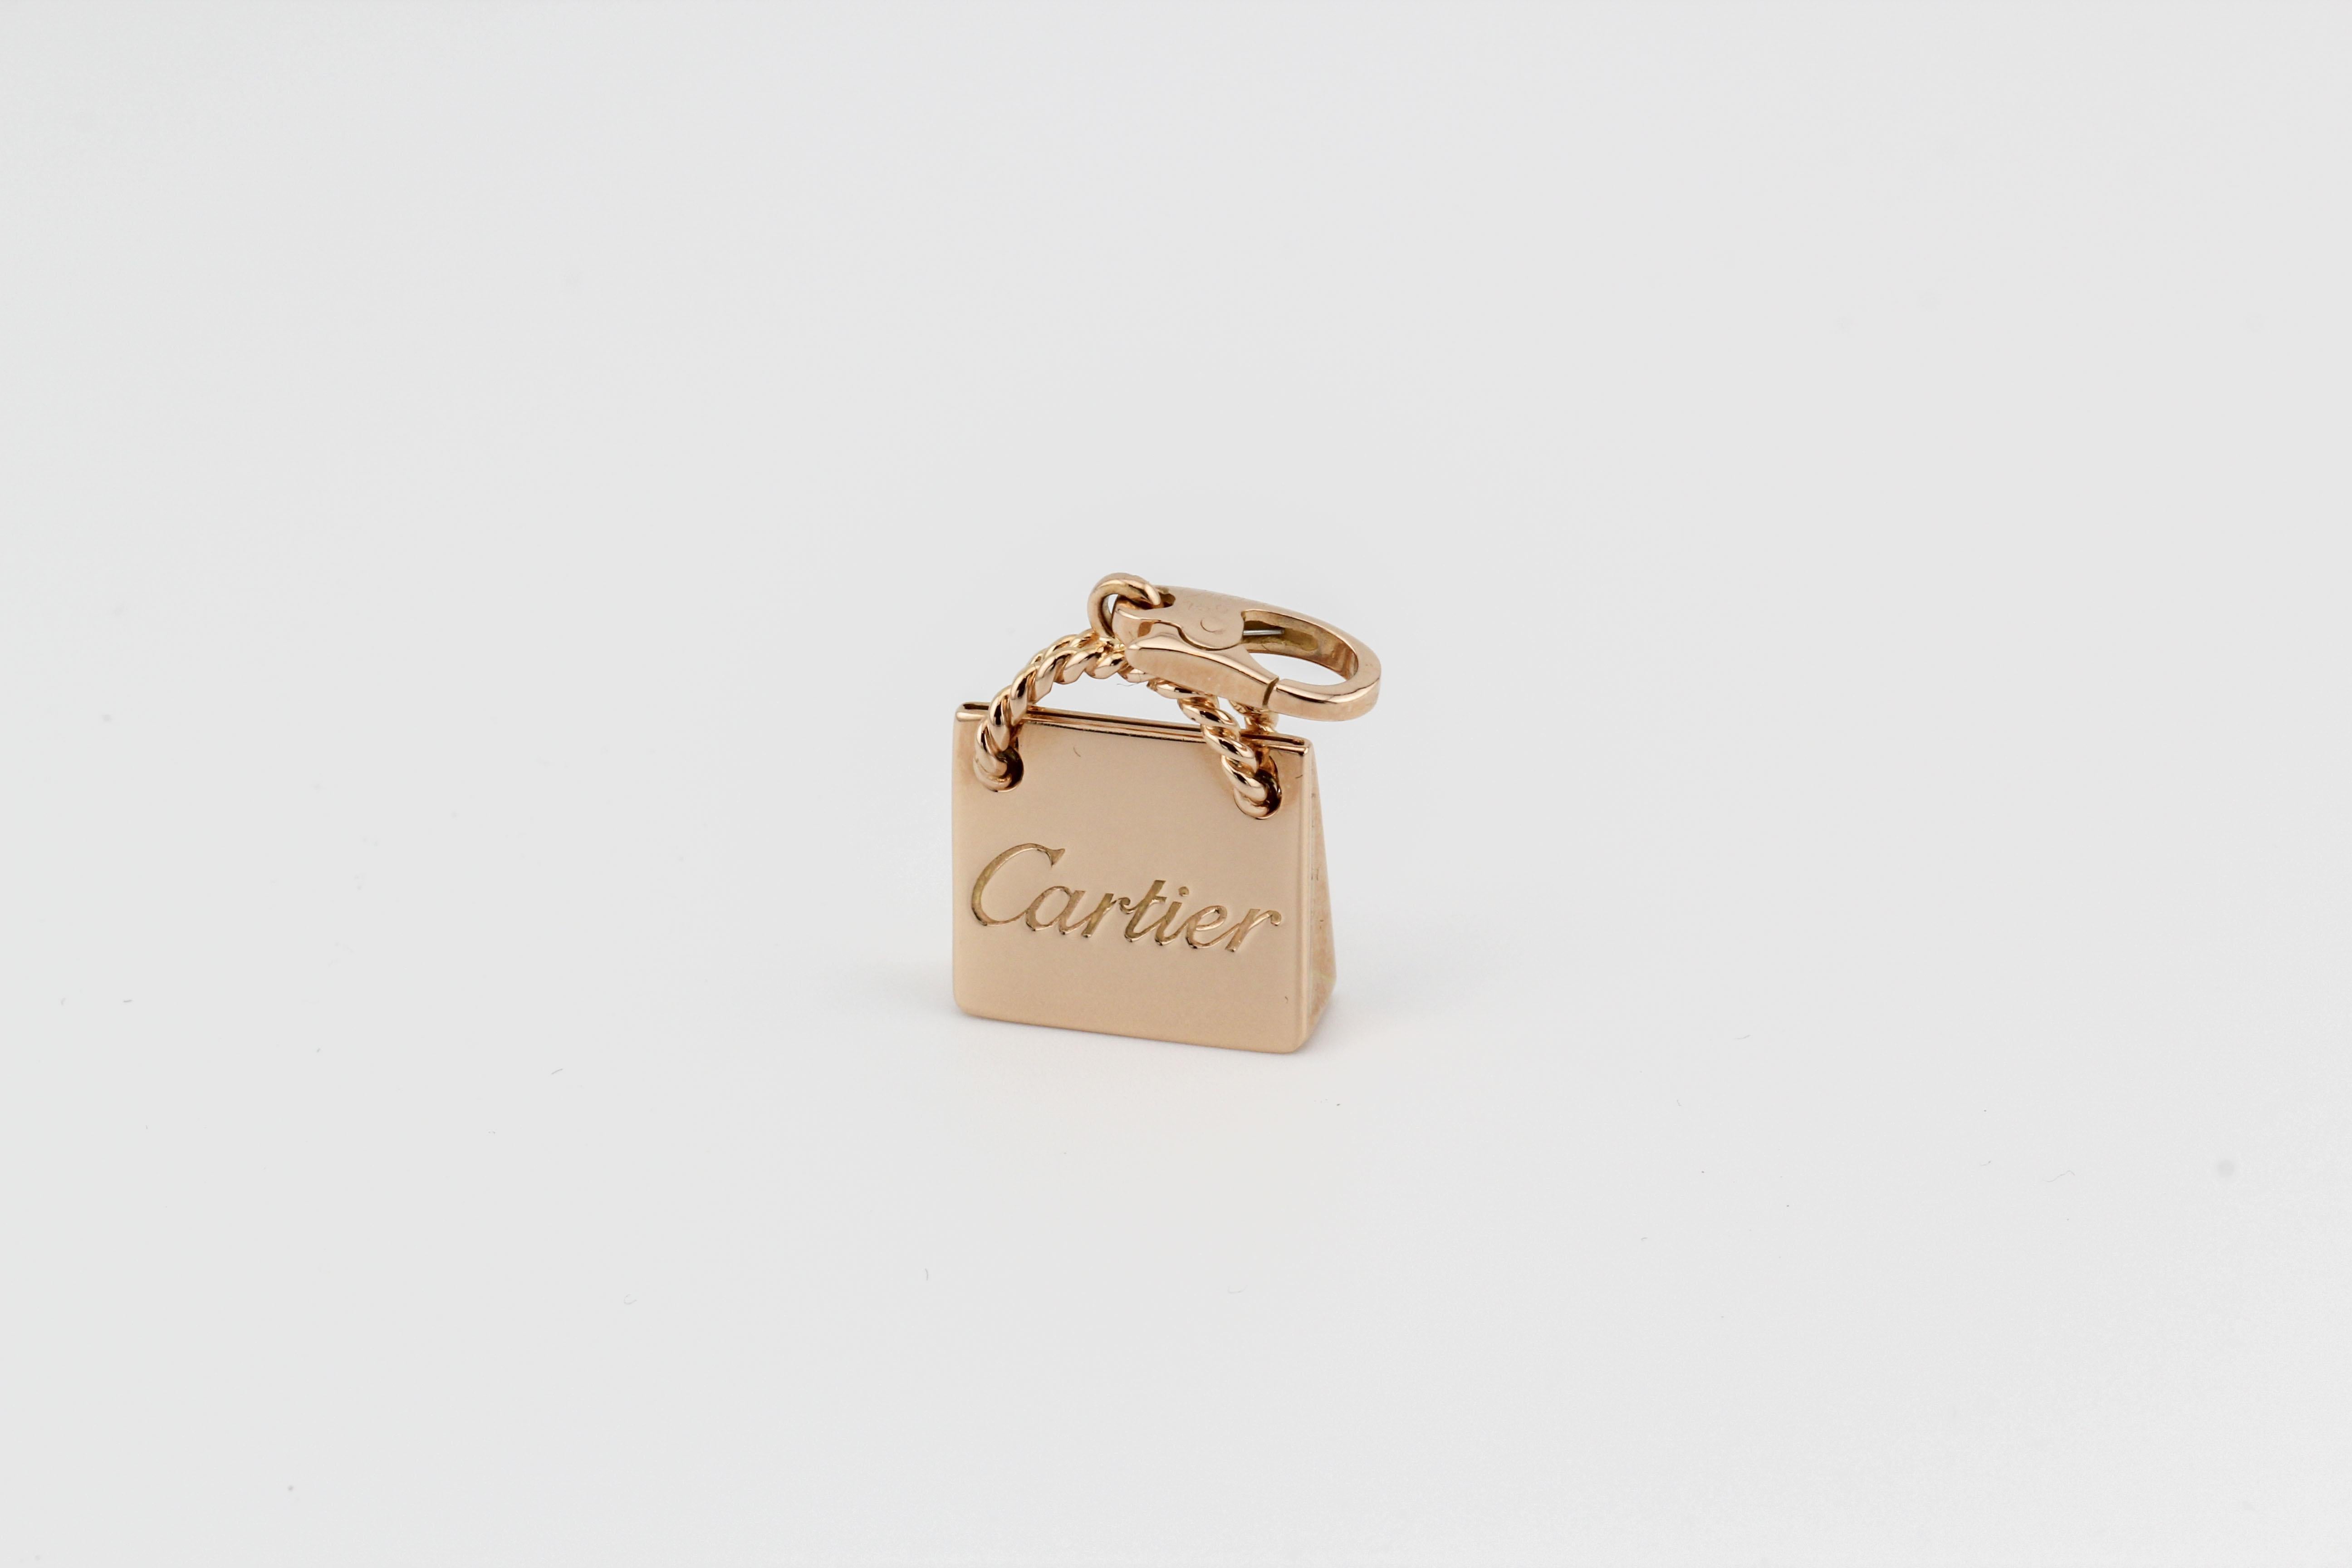 Introducing the Cartier 18K Pink Gold Shopping Bag Charm Pendant, a whimsical and luxurious jewelry piece that playfully captures the spirit of high-end shopping and elegance. This charming pendant is a delightful representation of Cartier's